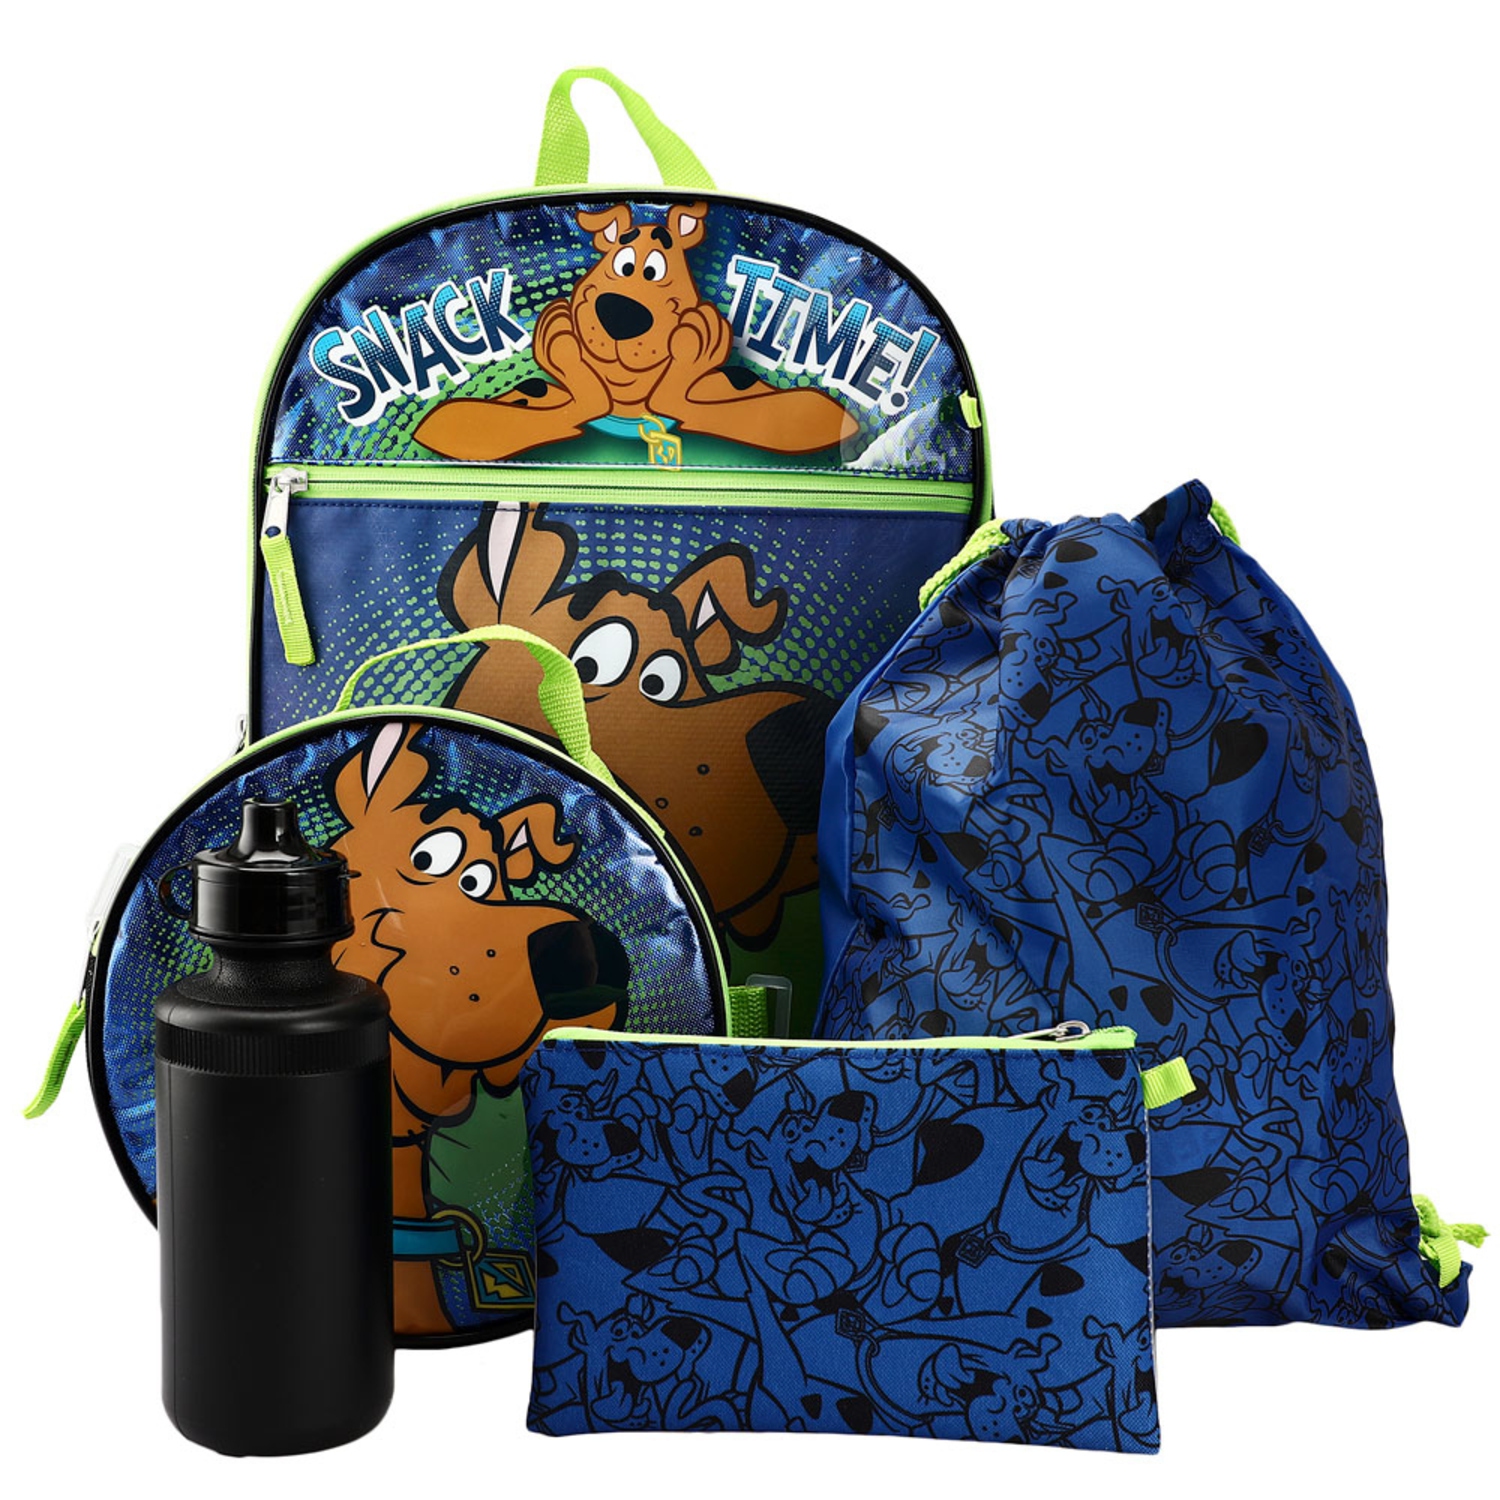 BIOWORLD Scooby Doo 5 Piece Backpack Set With Novelty Shaped Lunch Bag